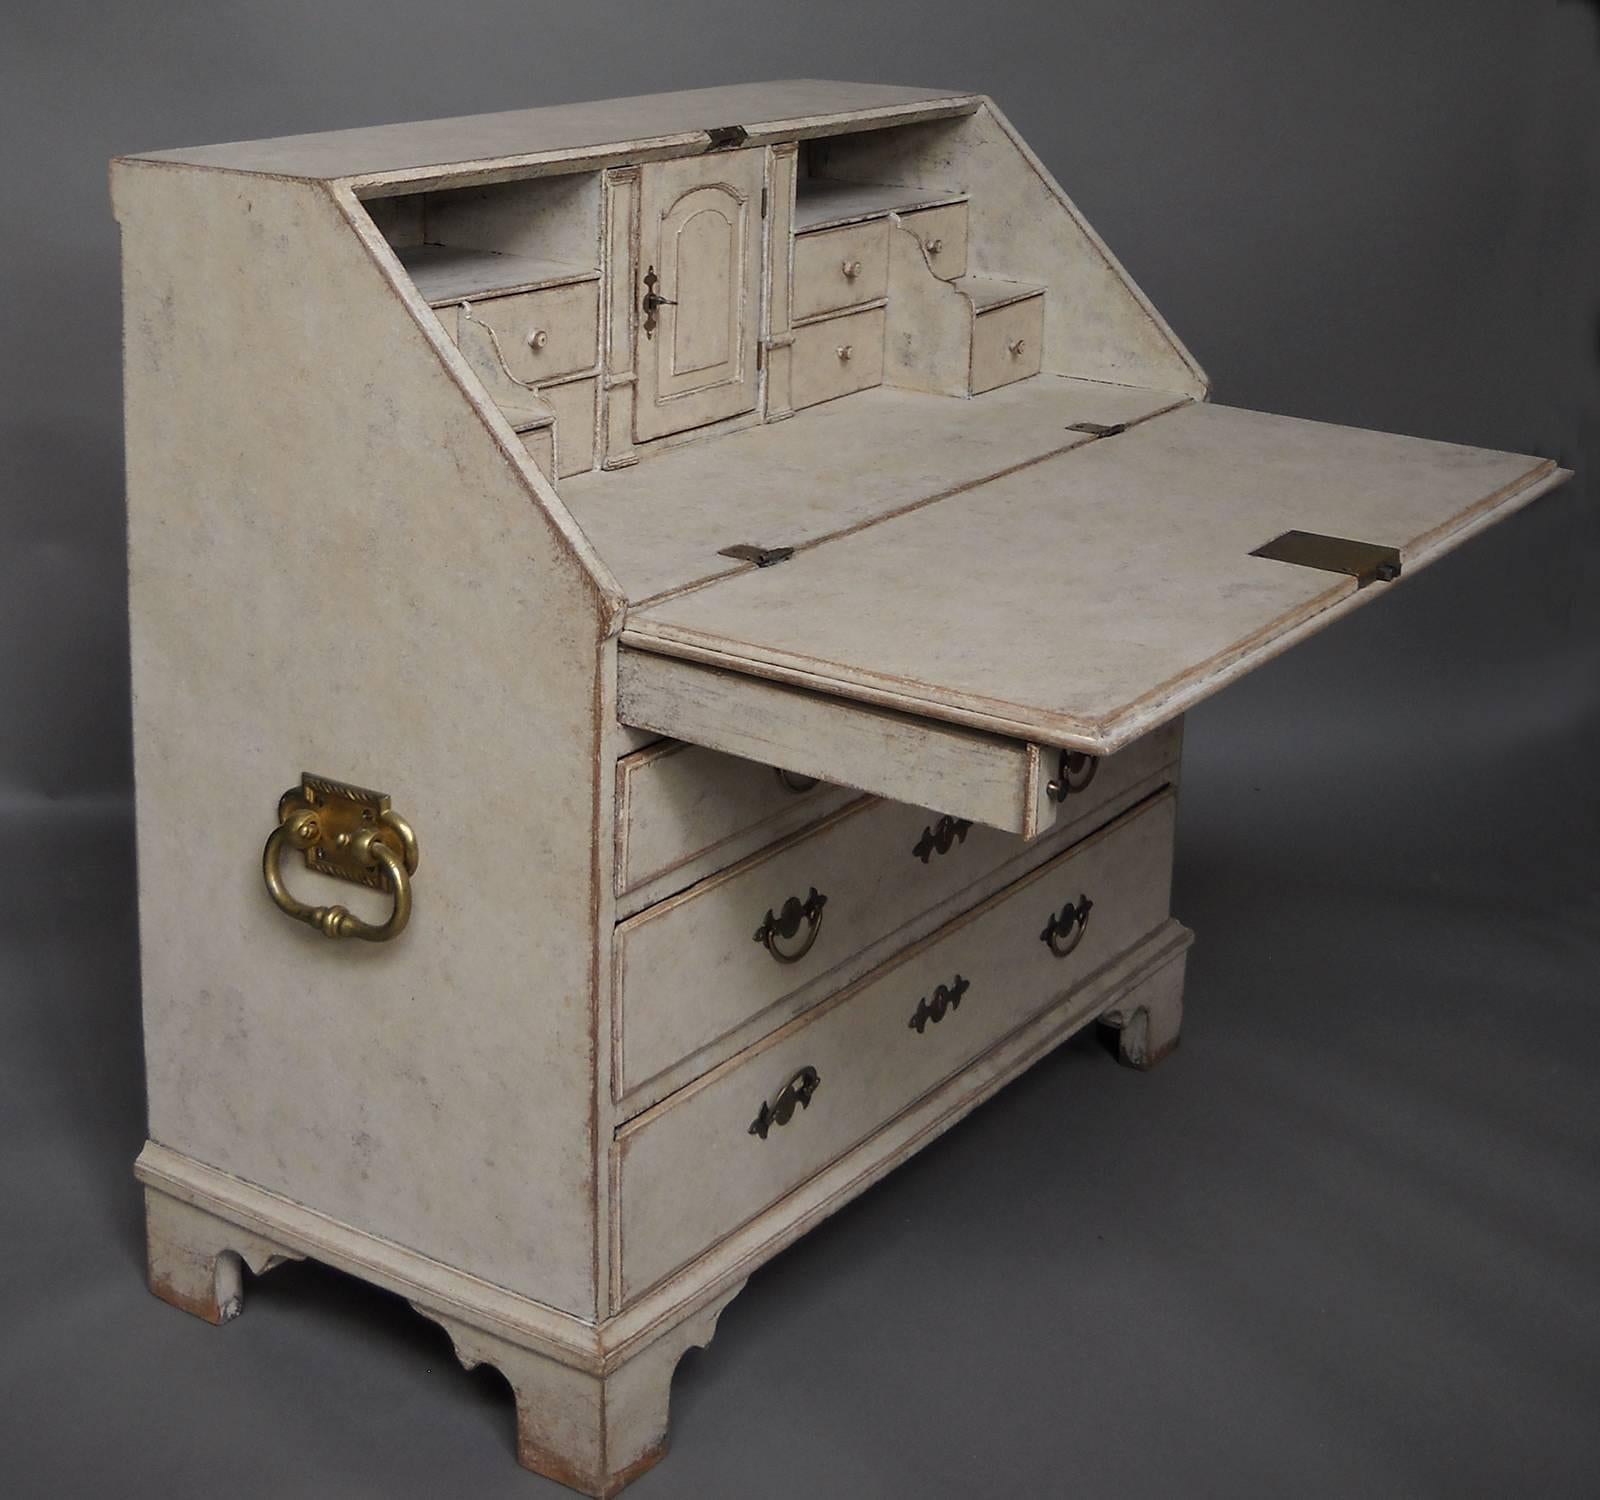 Swedish slant-front writing desk, circa 1780, with fitted interior and retaining its original brass hardware. Behind the drop front are several banks of stepped drawers, two disguised document drawers and a compartment with a signed drawer and